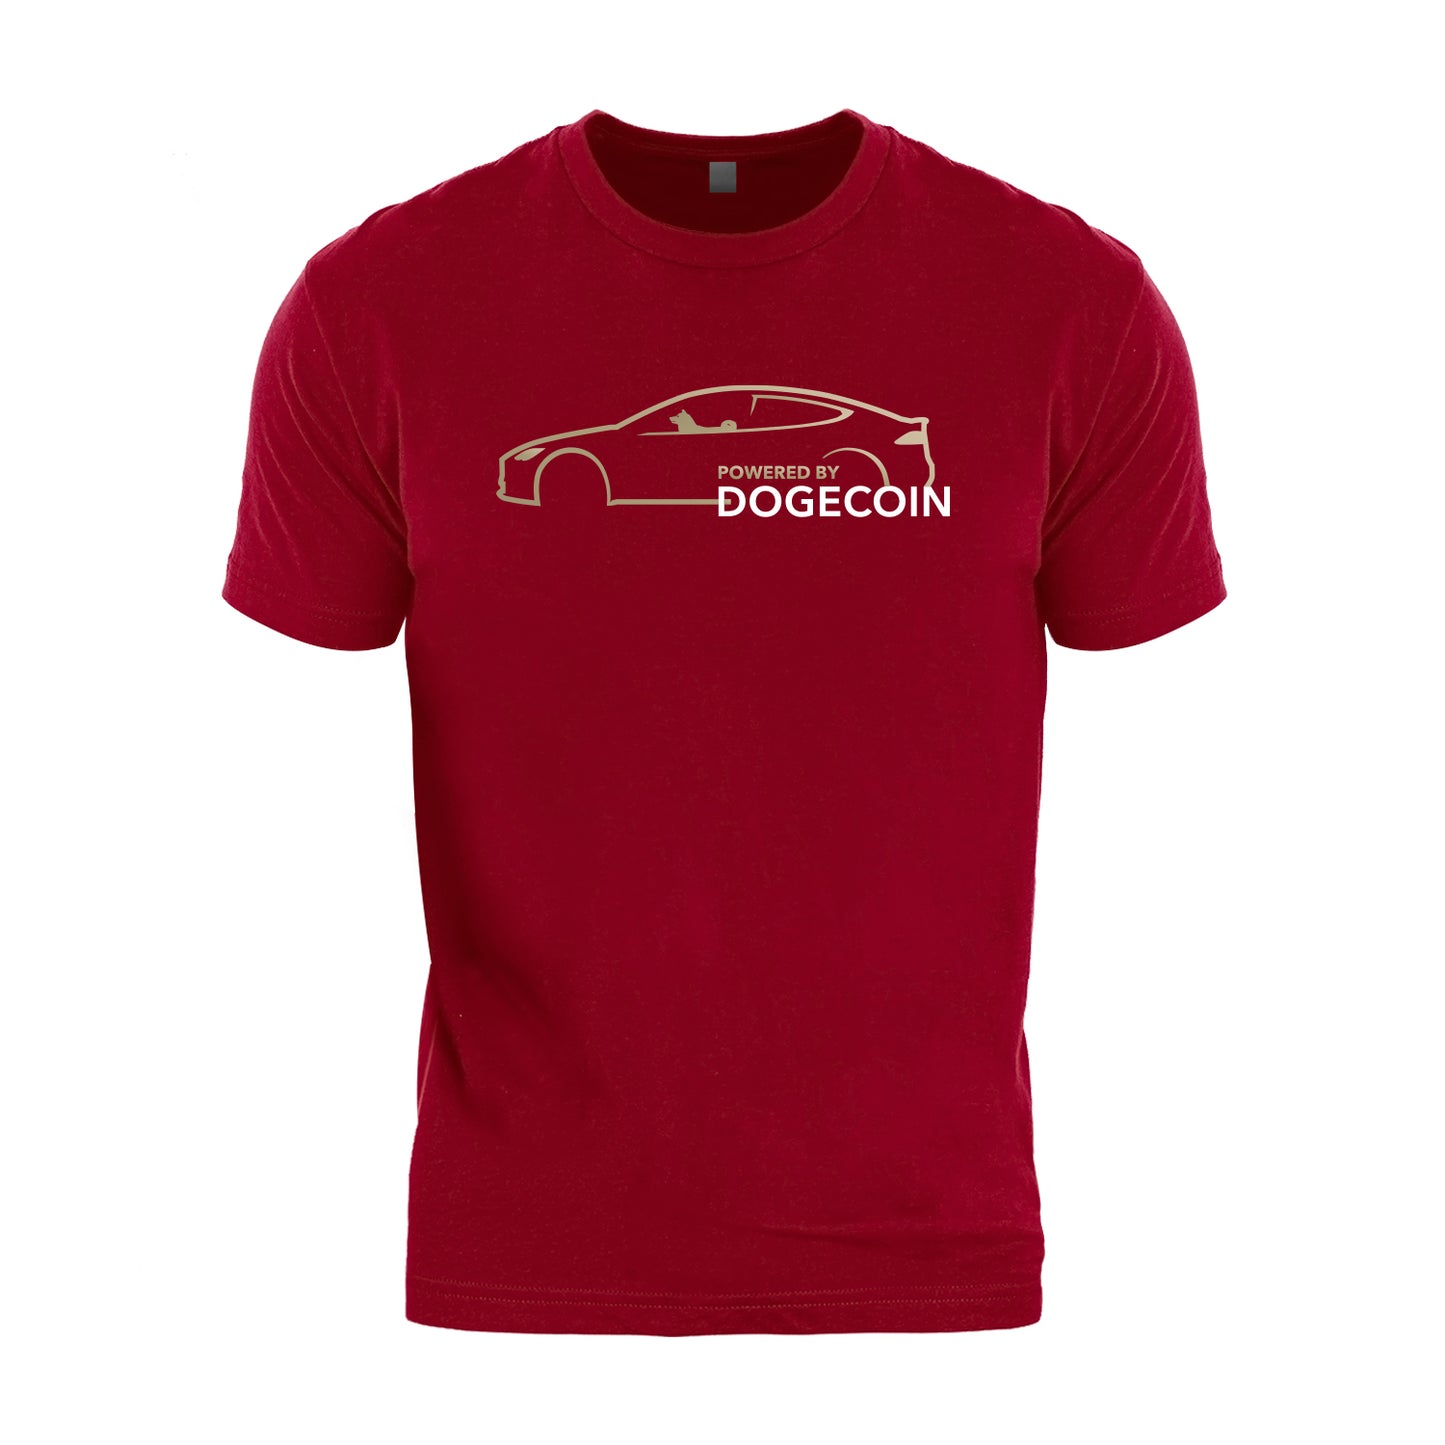 Powered By Dogecoin Model S Inspired Silhouette T-Shirt